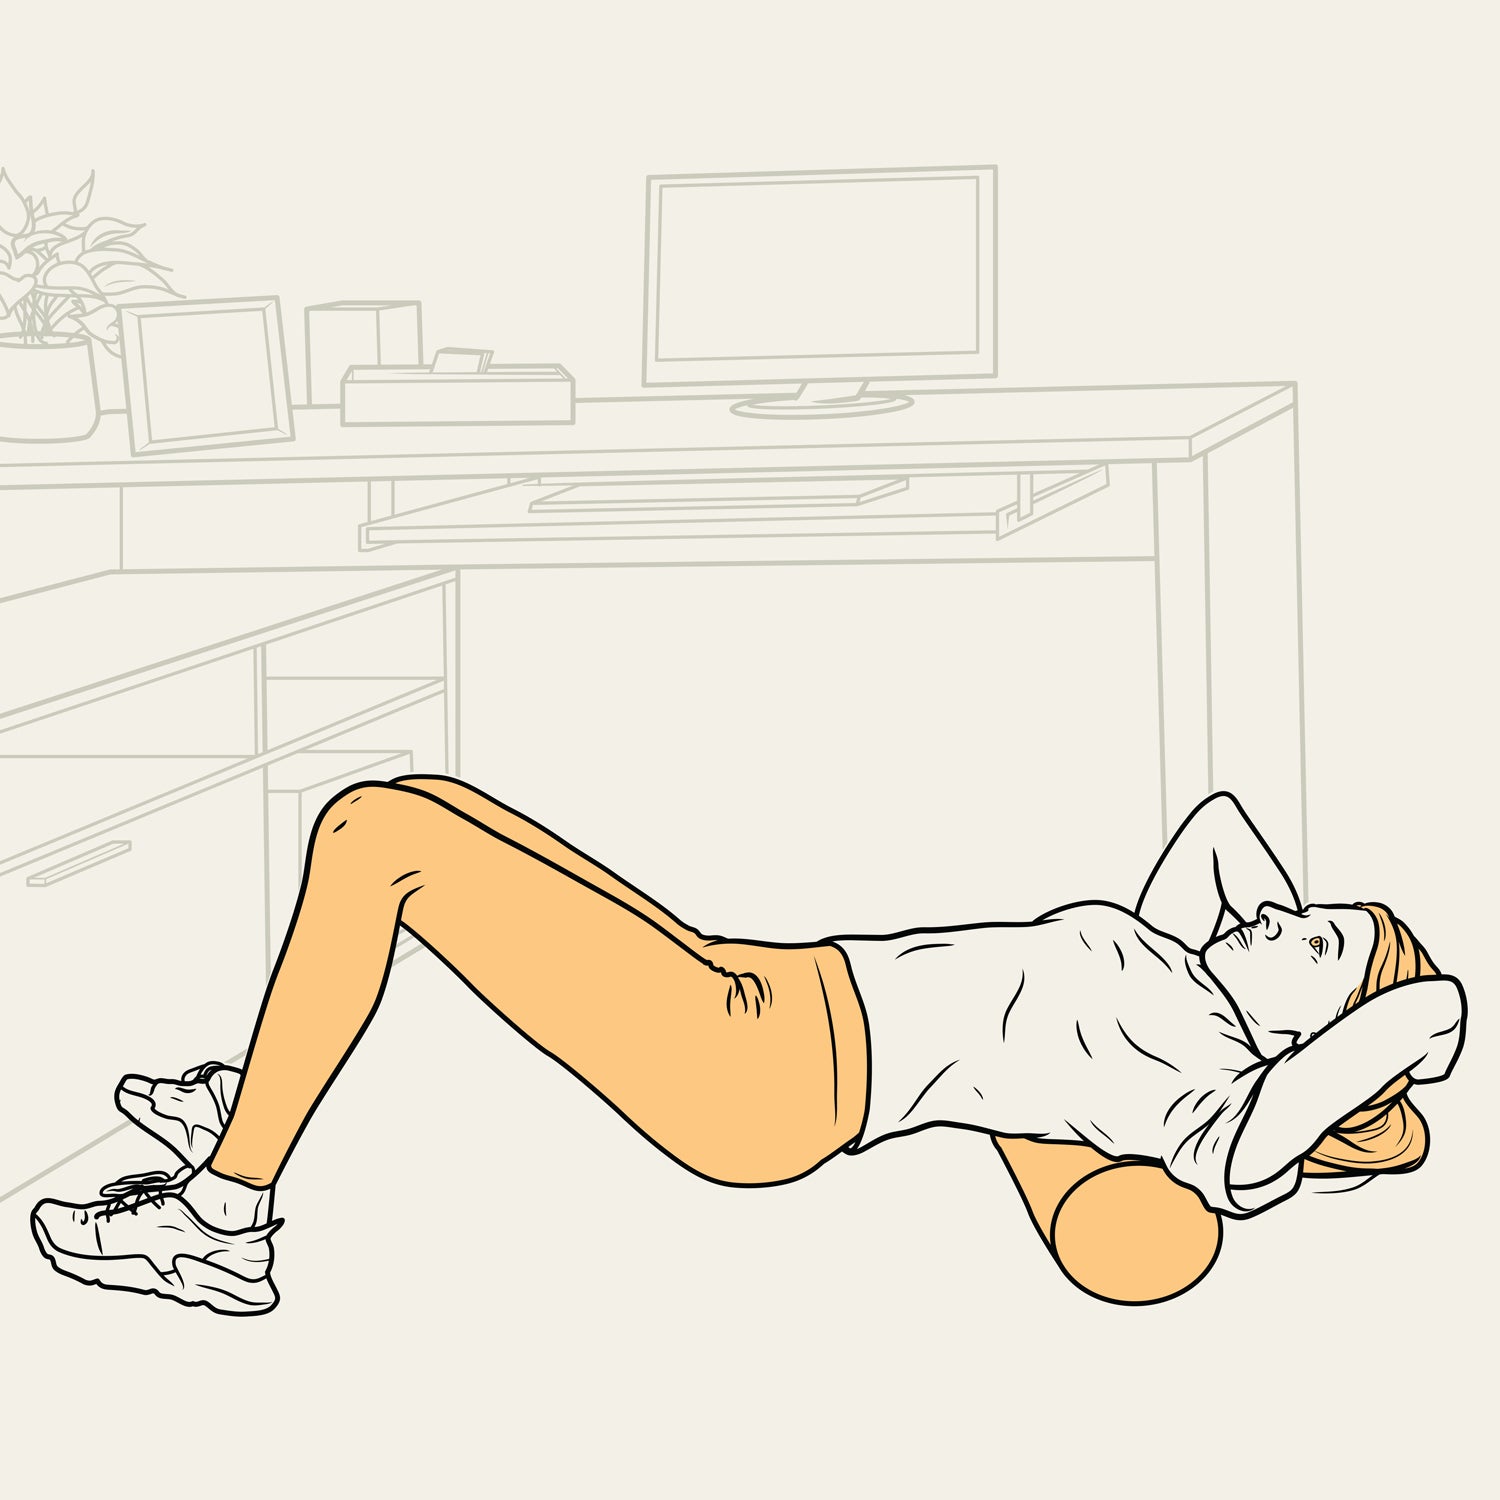 How to Stretch Your Spine After Sitting All Day